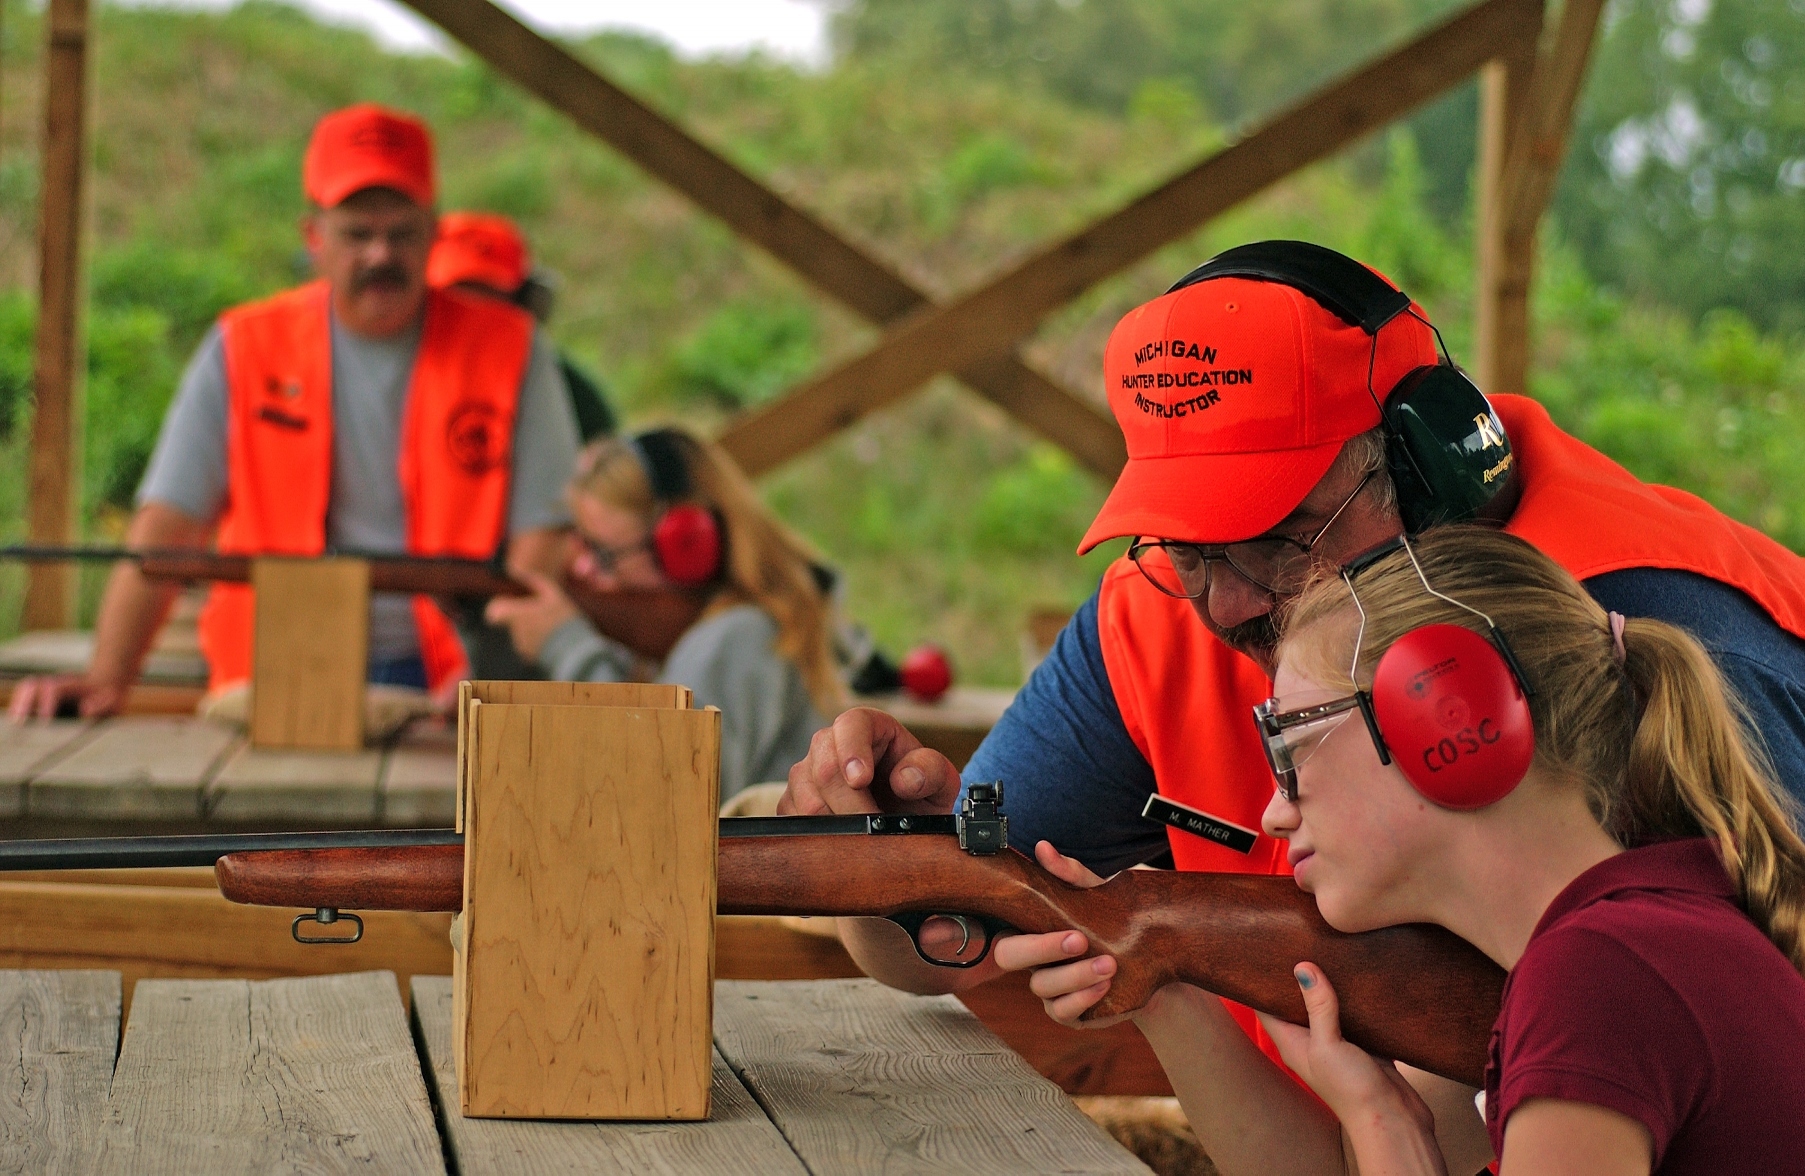 Hunter safety education students learn how to safely and properly use firearms.